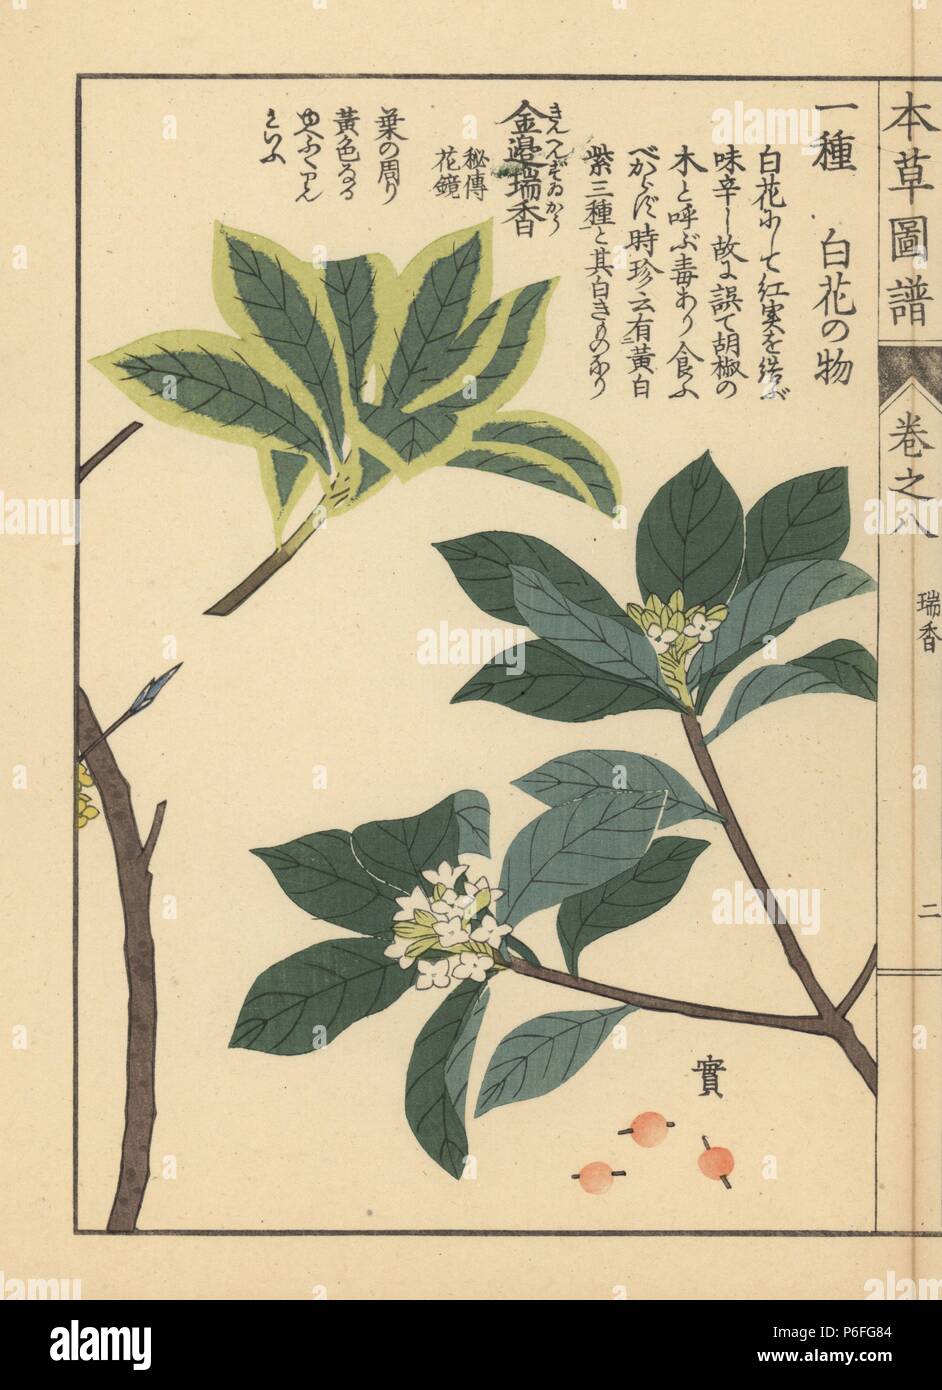 Indian paper plant or lokta, Daphne papyracea (Daphne cannabina Wall.) and winter daphne, Daphne odora Thunb. forma marginata Mak. Colour-printed woodblock engraving by Kan'en Iwasaki from 'Honzo Zufu,' an Illustrated Guide to Medicinal Plants, Japan, 1884. Iwasaki (1786-1842) was a Japanese botanist, entomologist and zoologist. He was one of the first Japanese botanists to incorporate western knowledge into his studies. Stock Photo